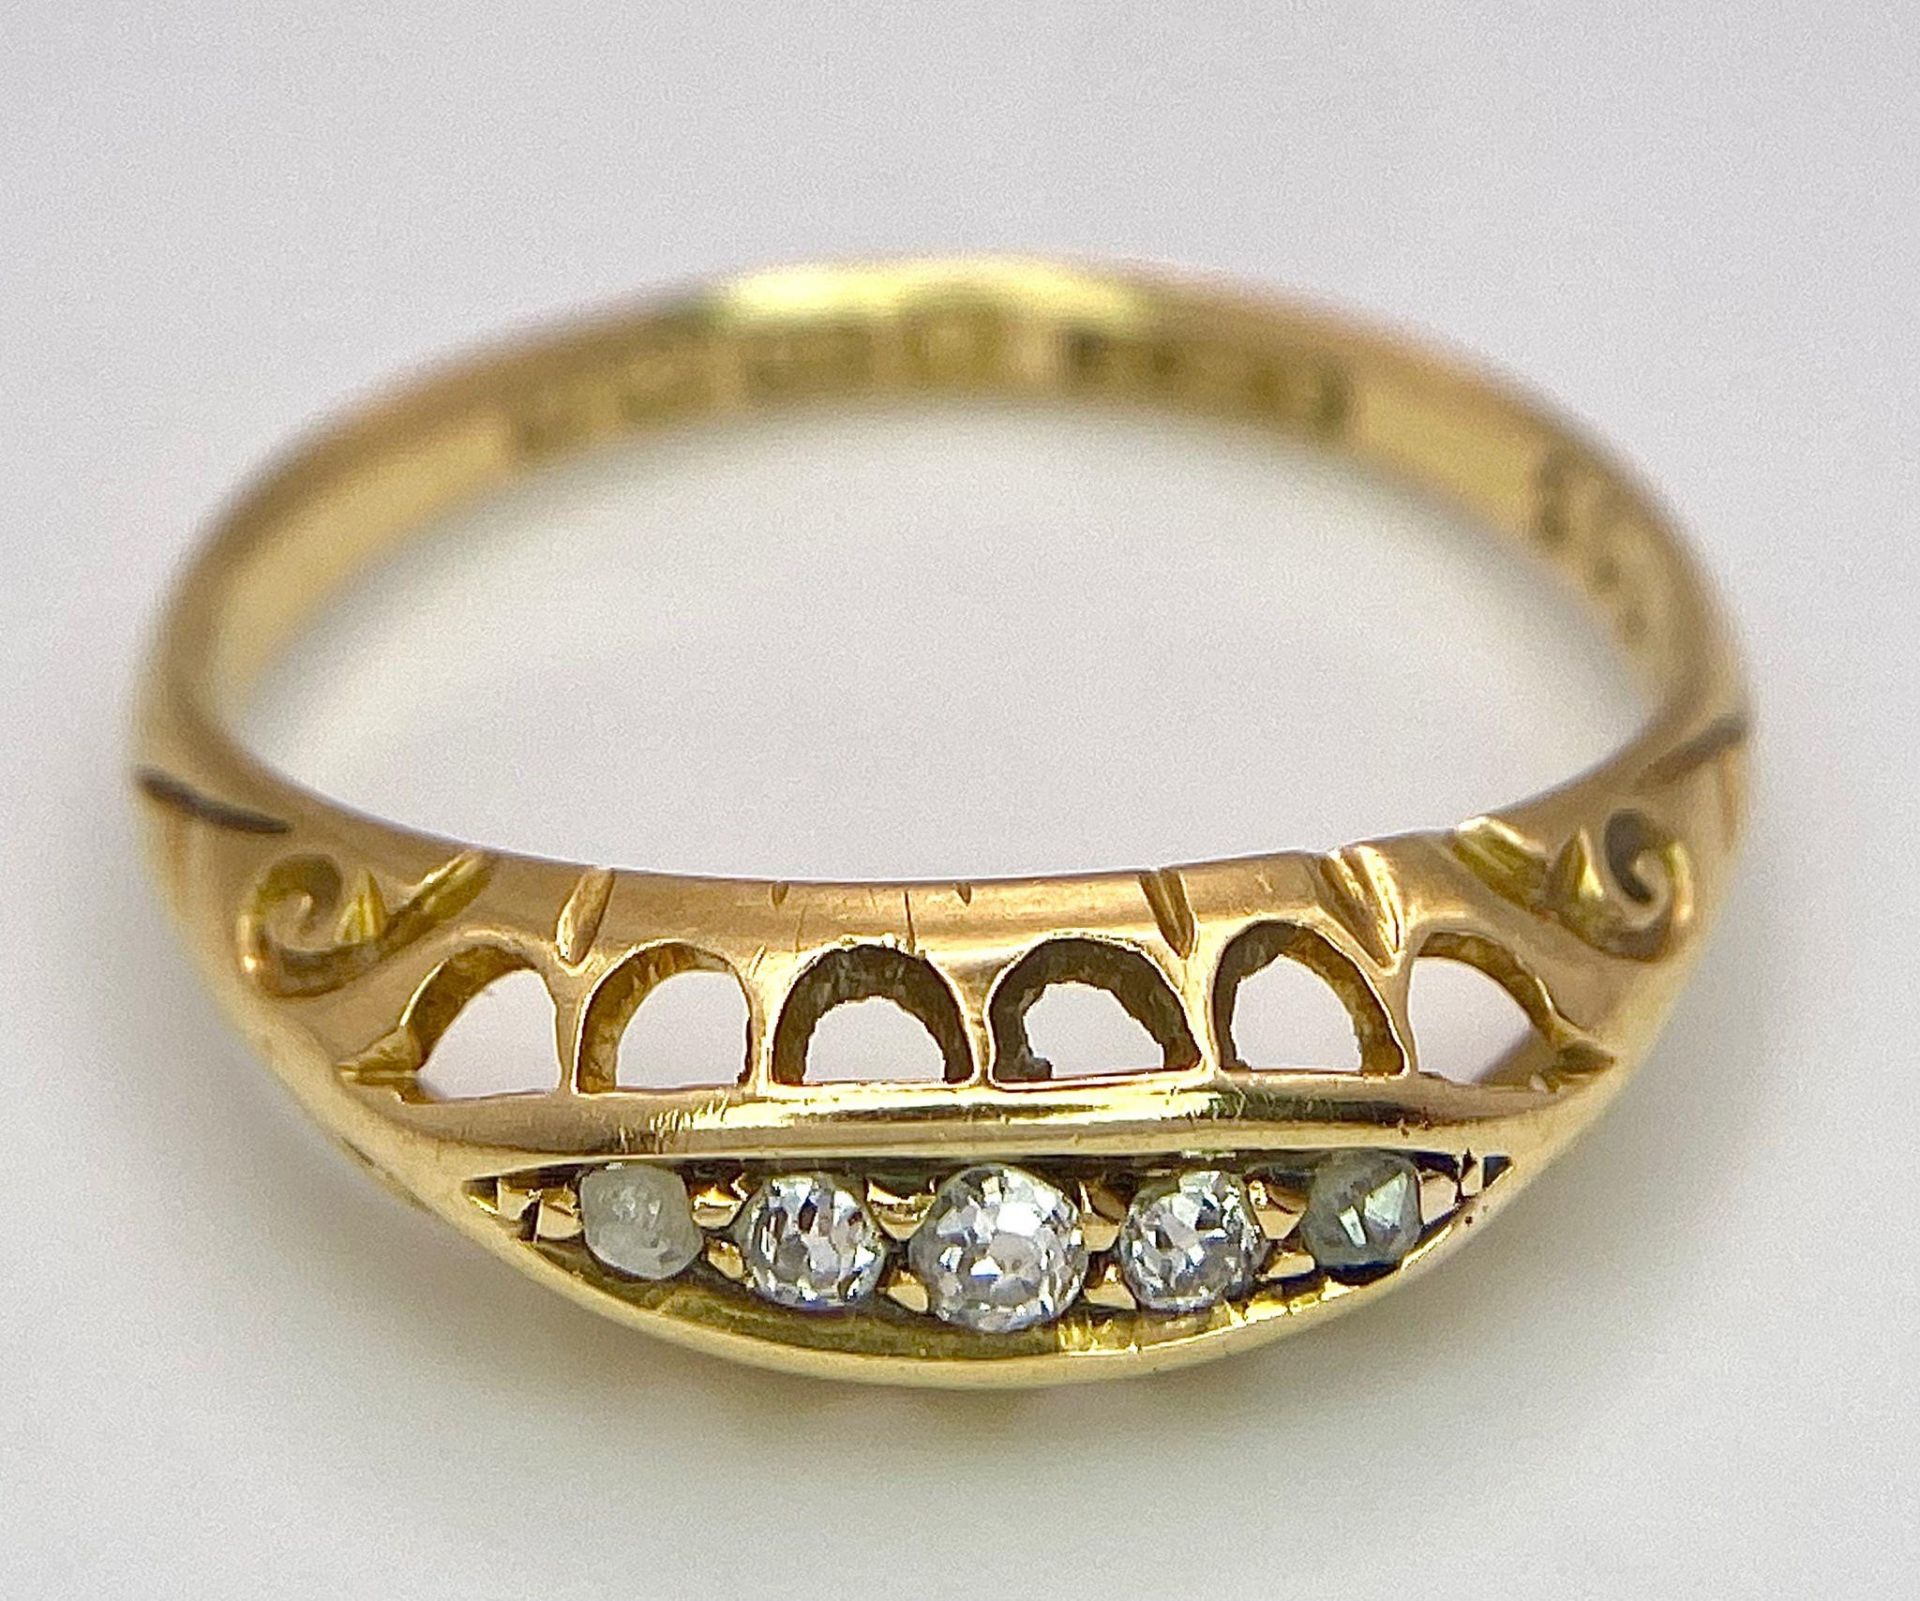 A Vintage 18K Yellow Gold Five Stone Diamond Ring. Full UK hallmarks. Size P. 2.5g total weight. - Image 4 of 8